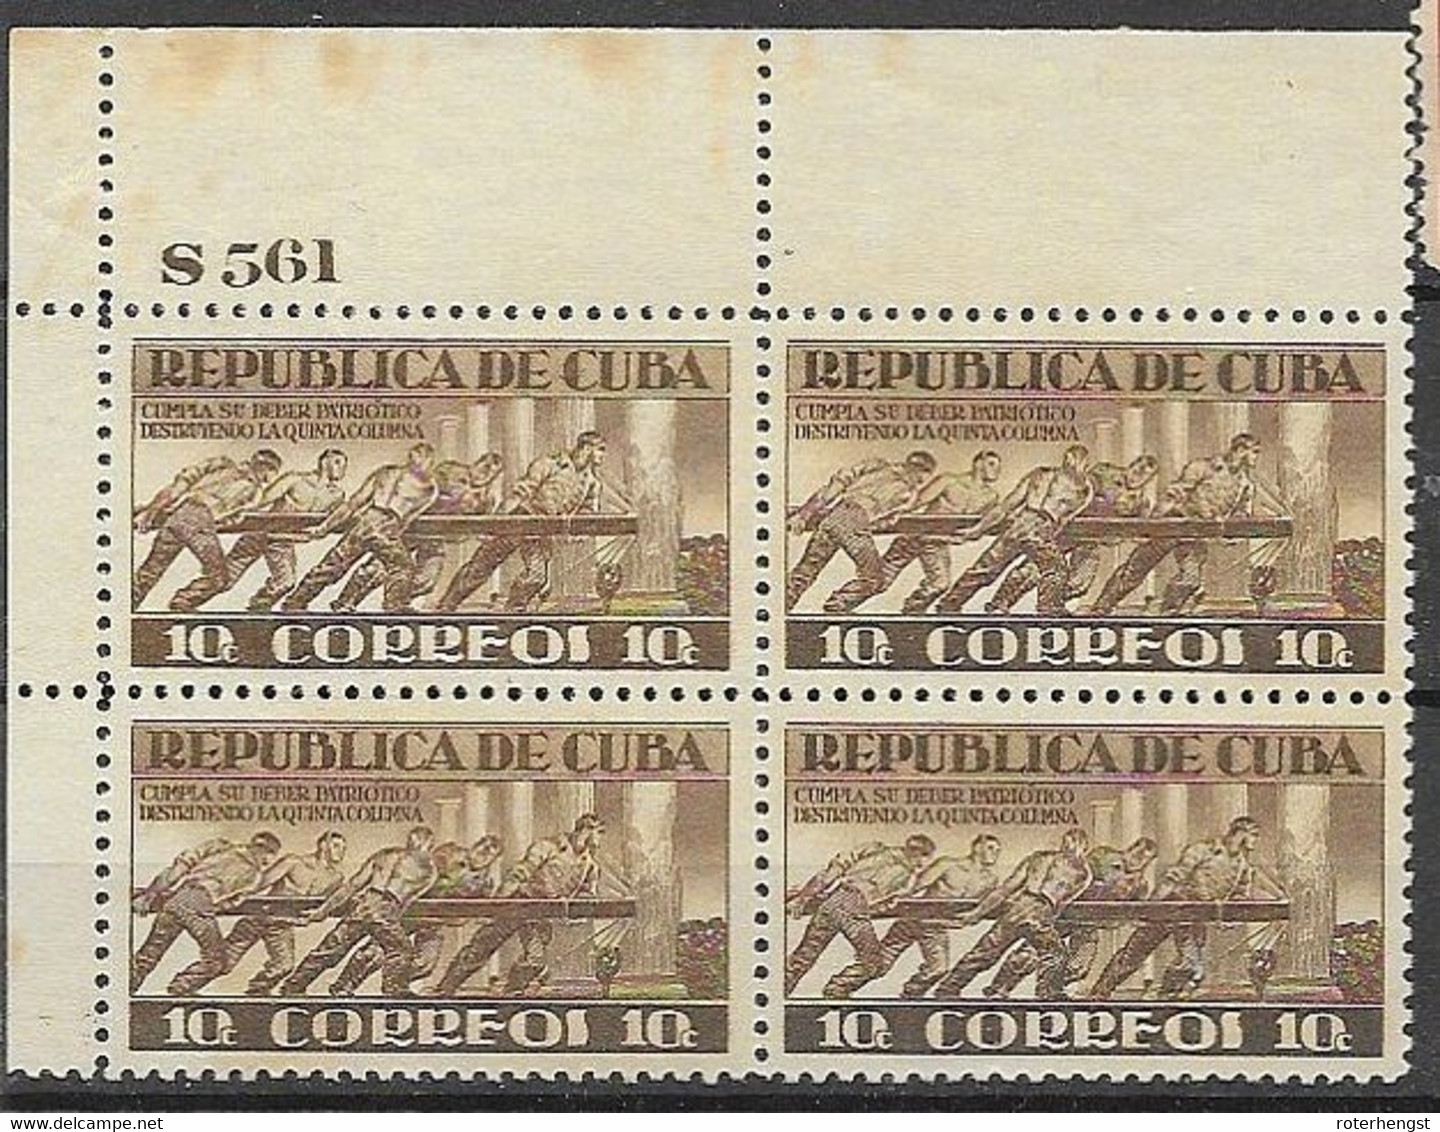 Cuba Mnh ** With Plate Number (stain Only On Border, Stamps Fine) 1943 About 30 Euros - Neufs